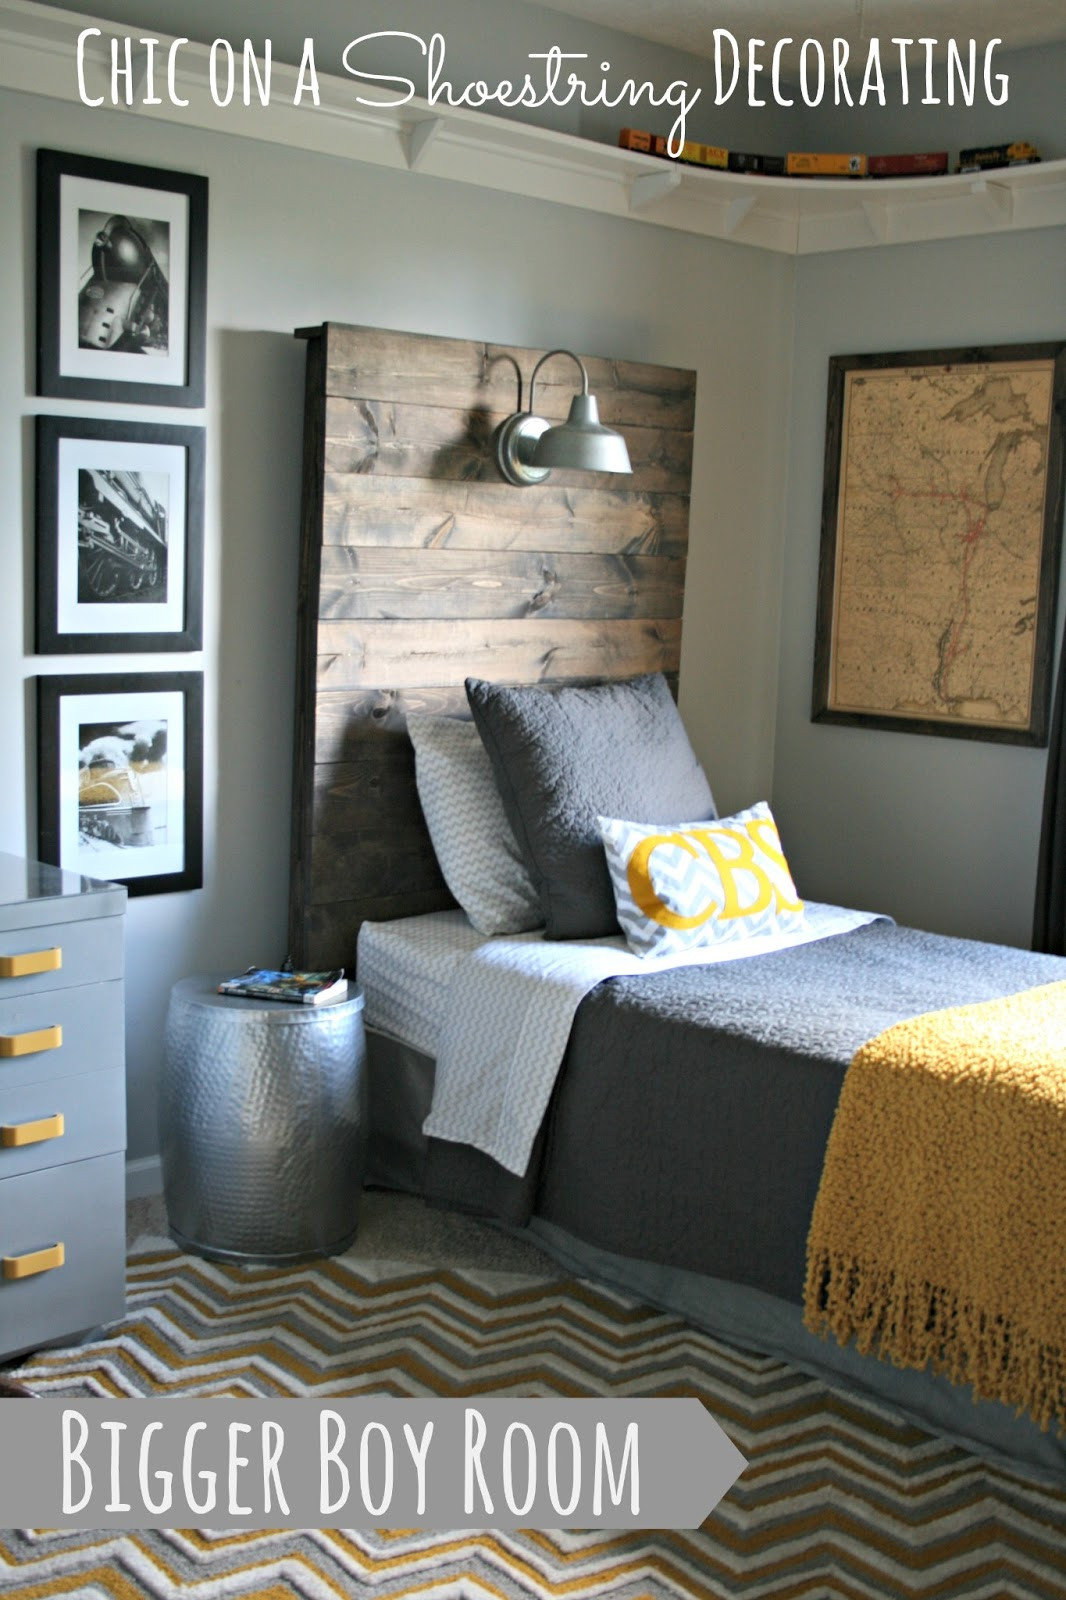 Boy Bedroom Ideas
 Chic on a Shoestring Decorating Bigger Boy Room Reveal